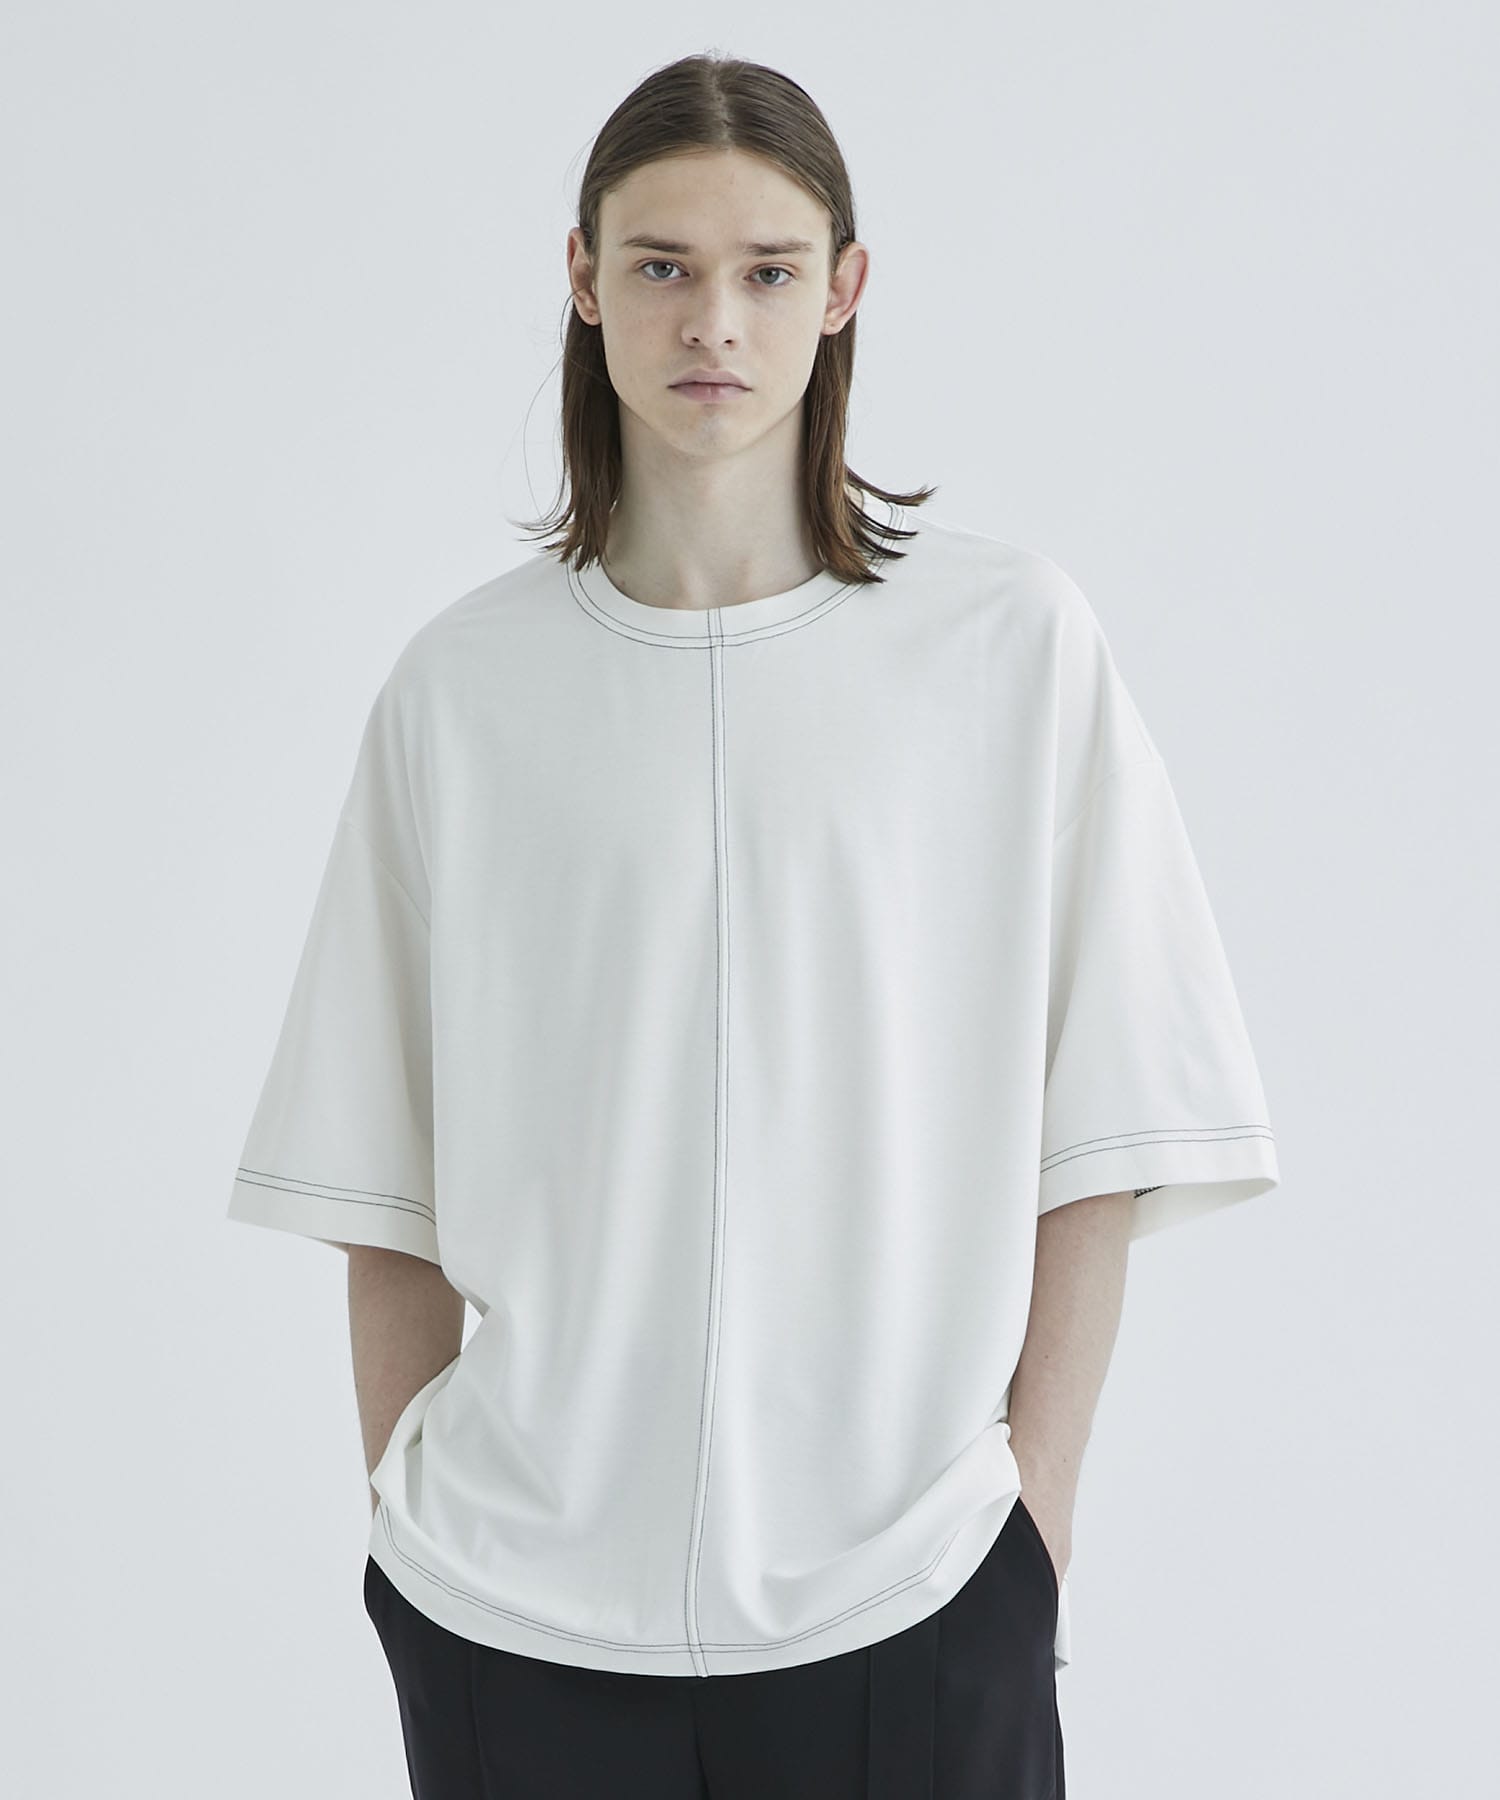 Contrast Stetch Tee